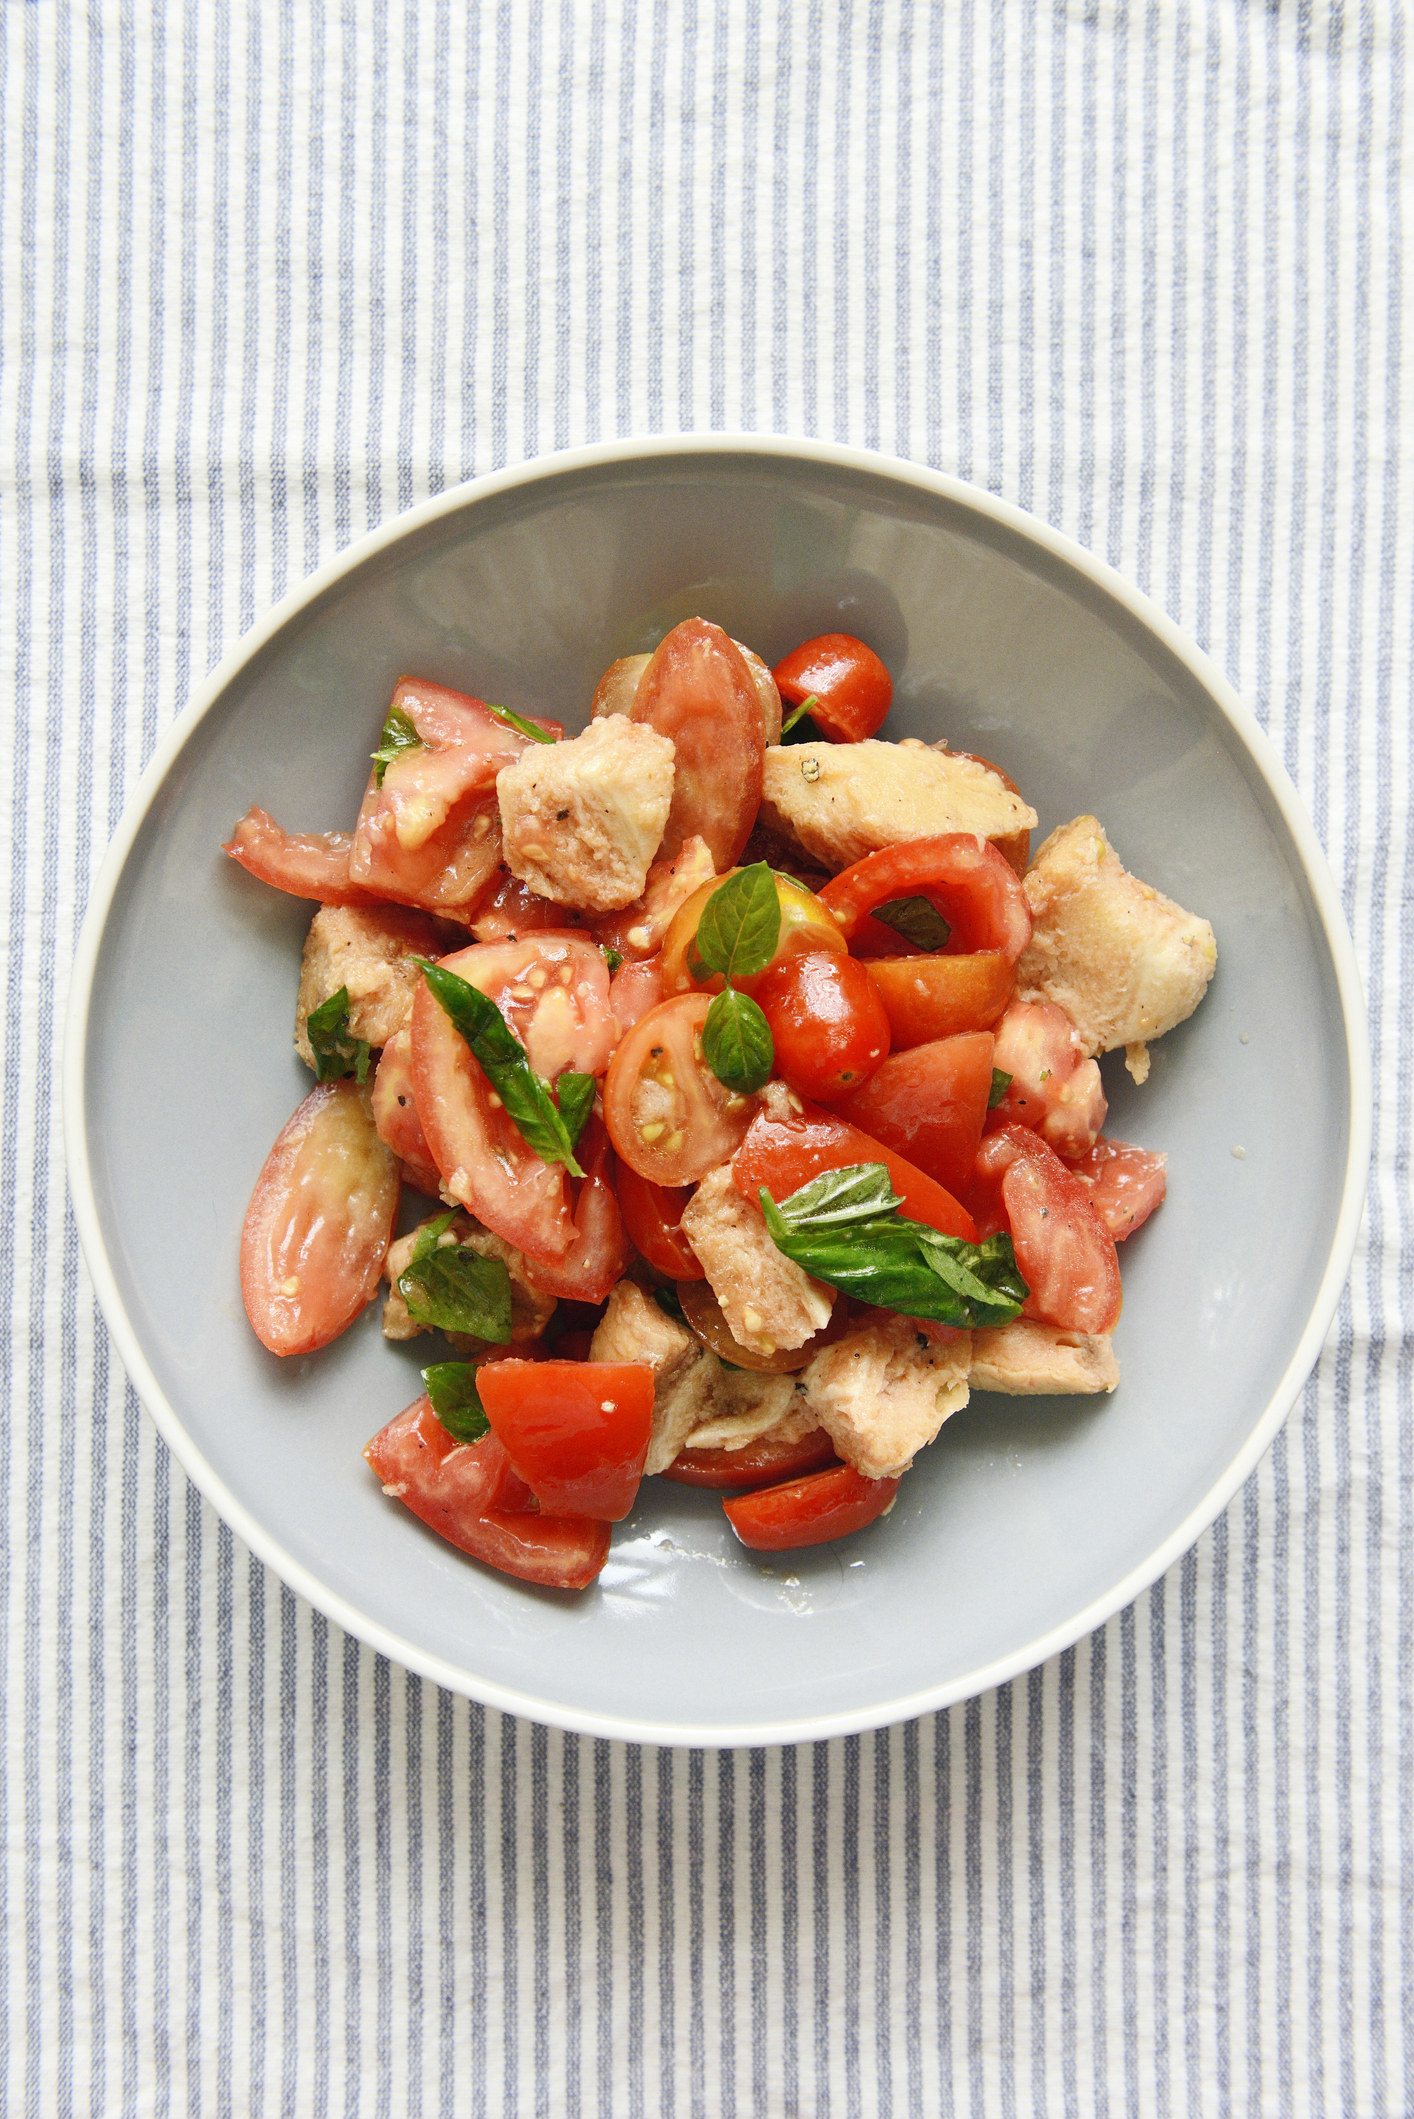 Bread salad with tomatoes and basil.